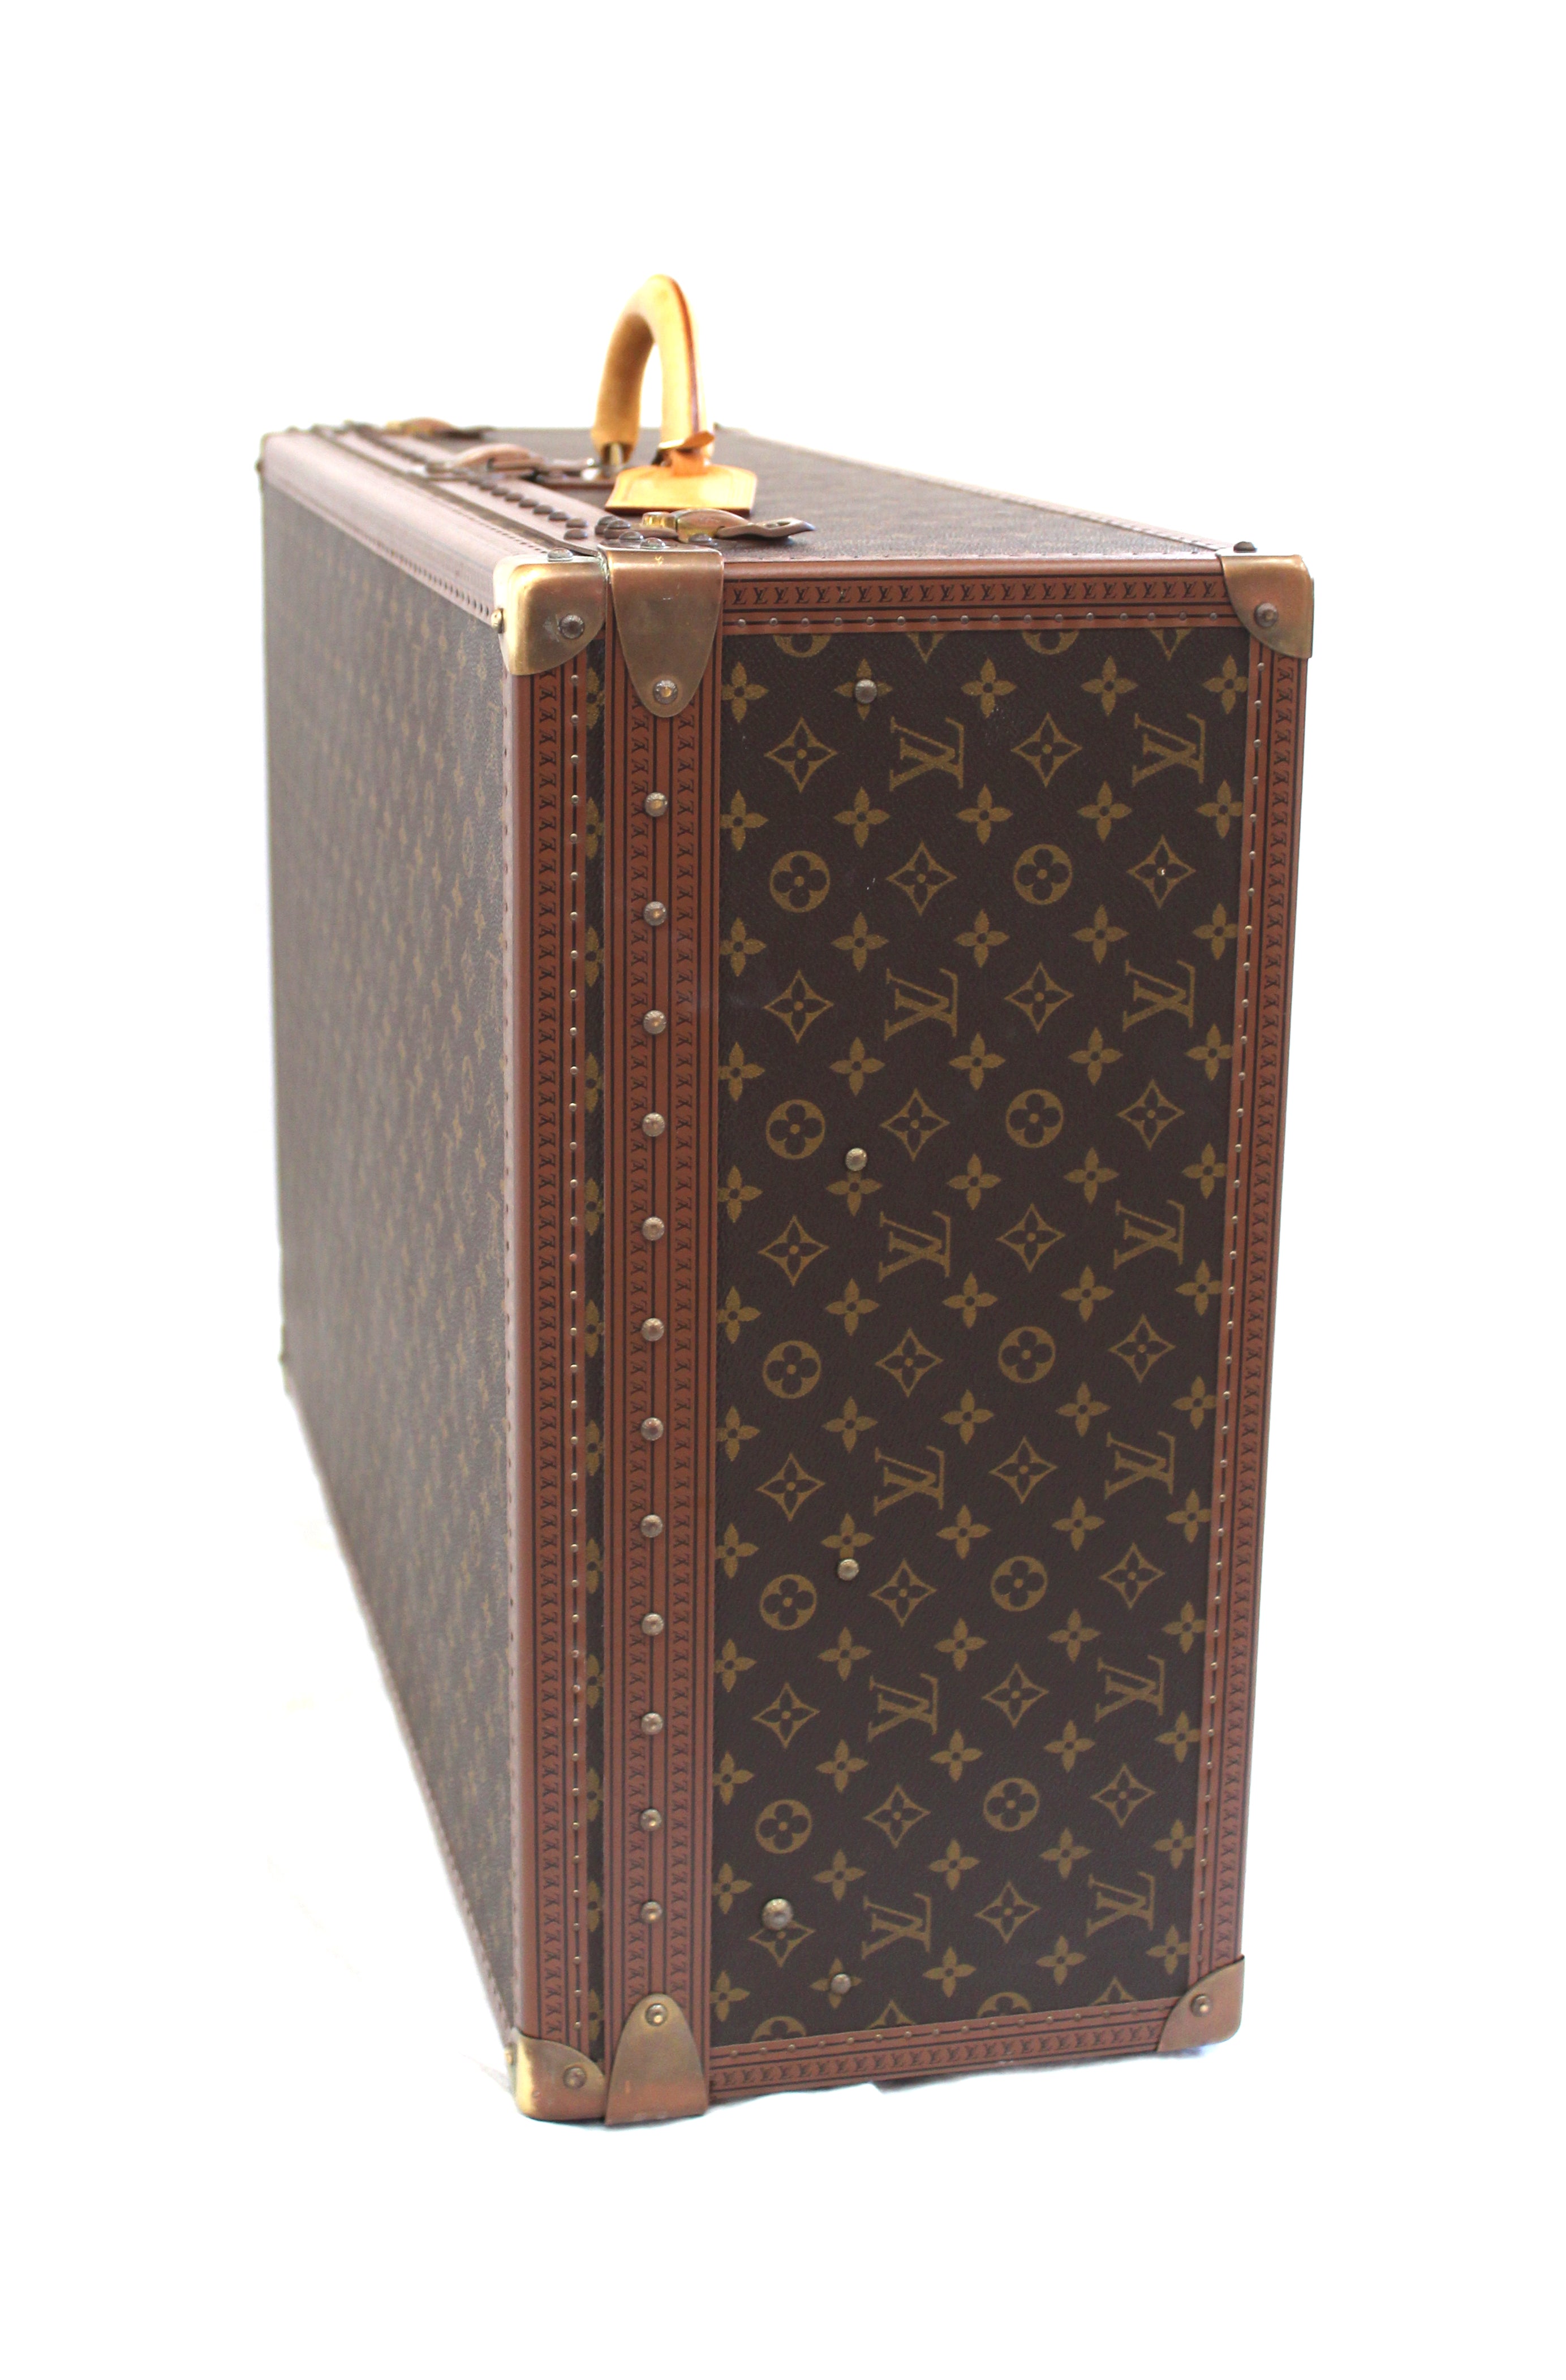 Alzer 80 Suitcase from Louis Vuitton